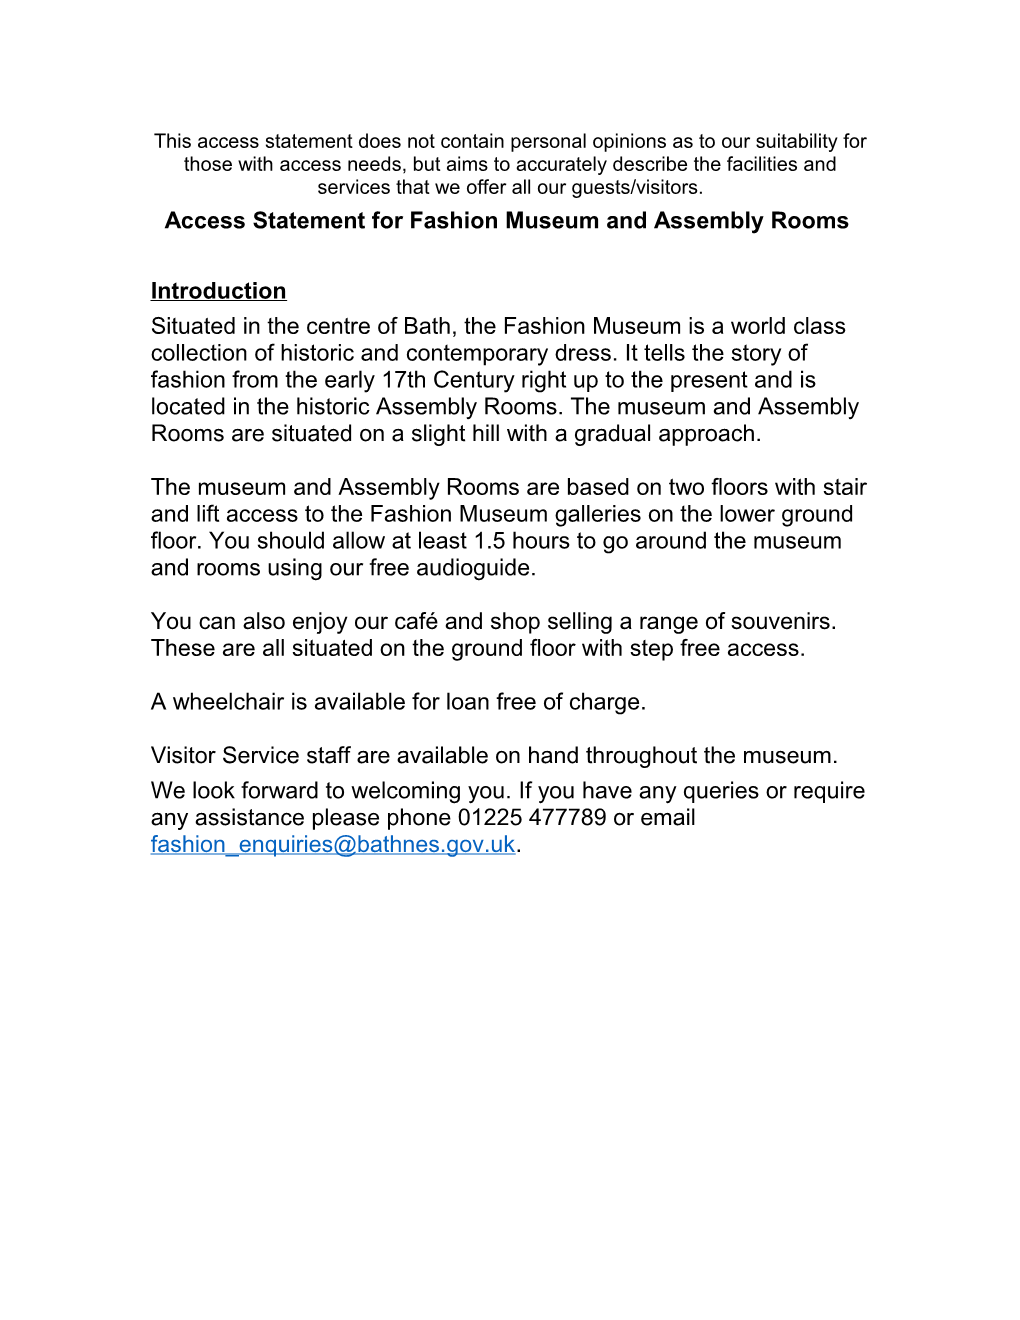 Access Statement for Fashion Museum and Assembly Rooms